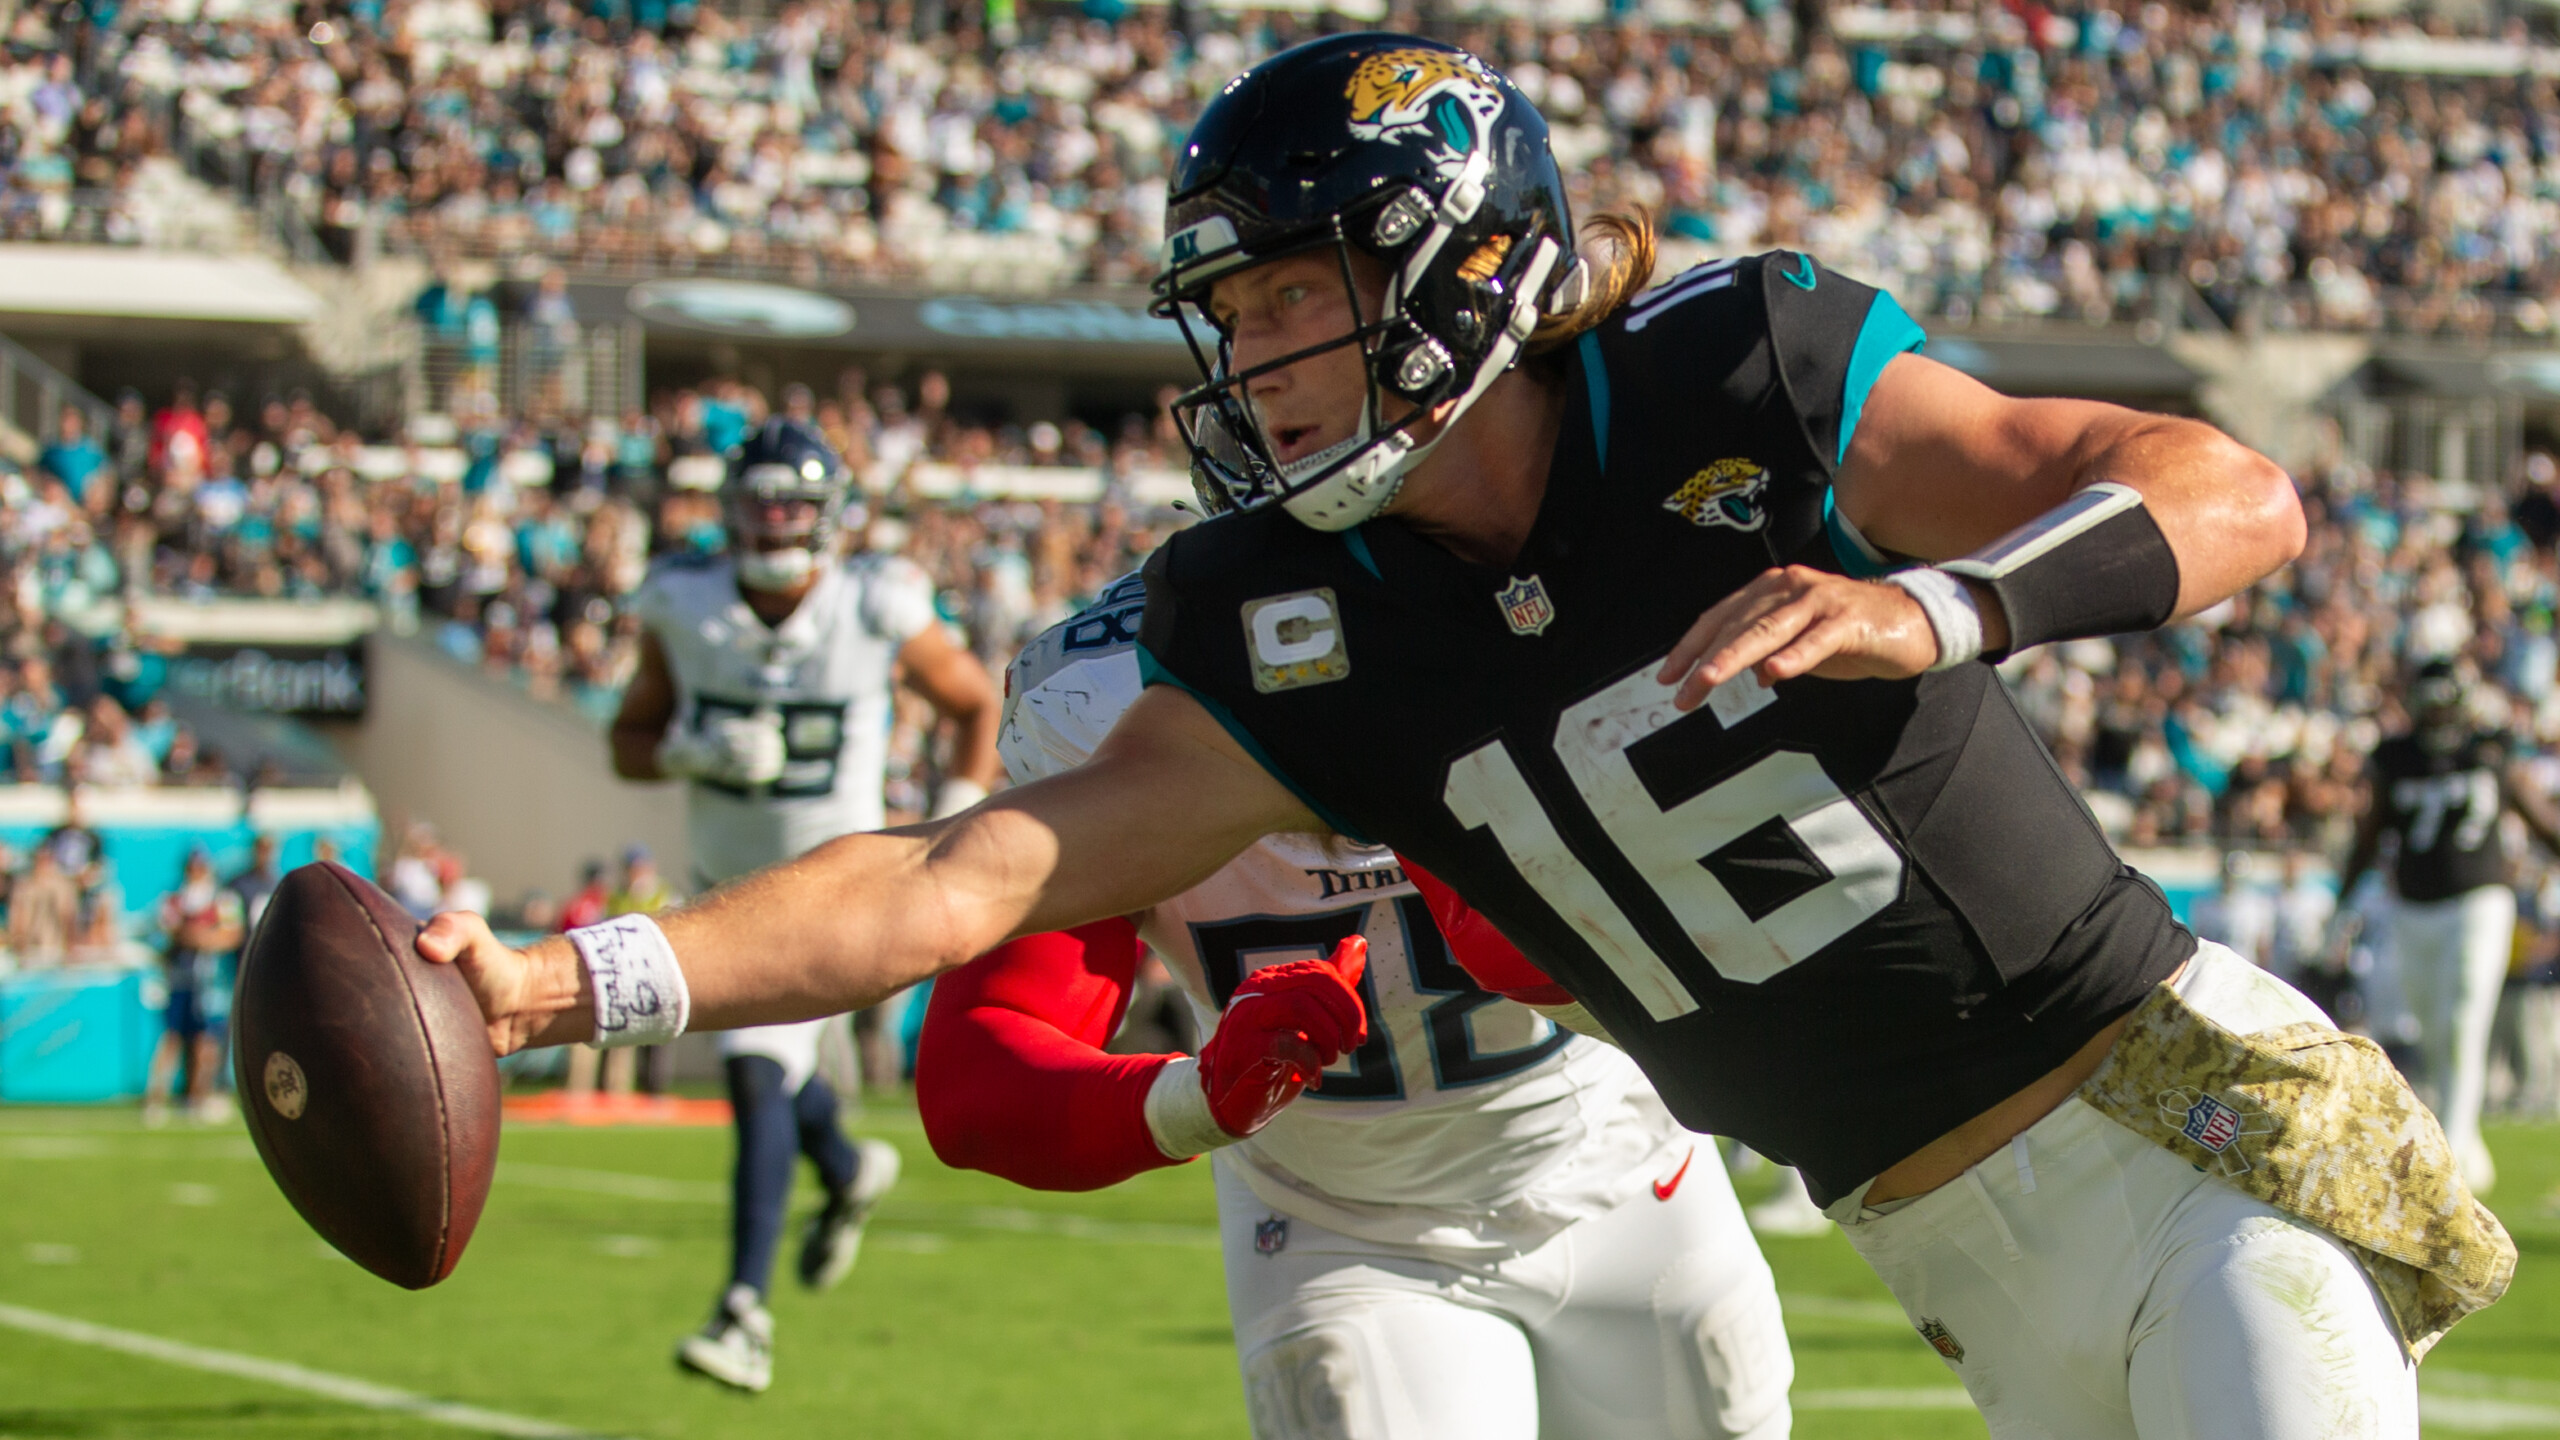 Featured image for “SPORTS | Back on track: Jaguars’ whipping of Titans calms concerns”